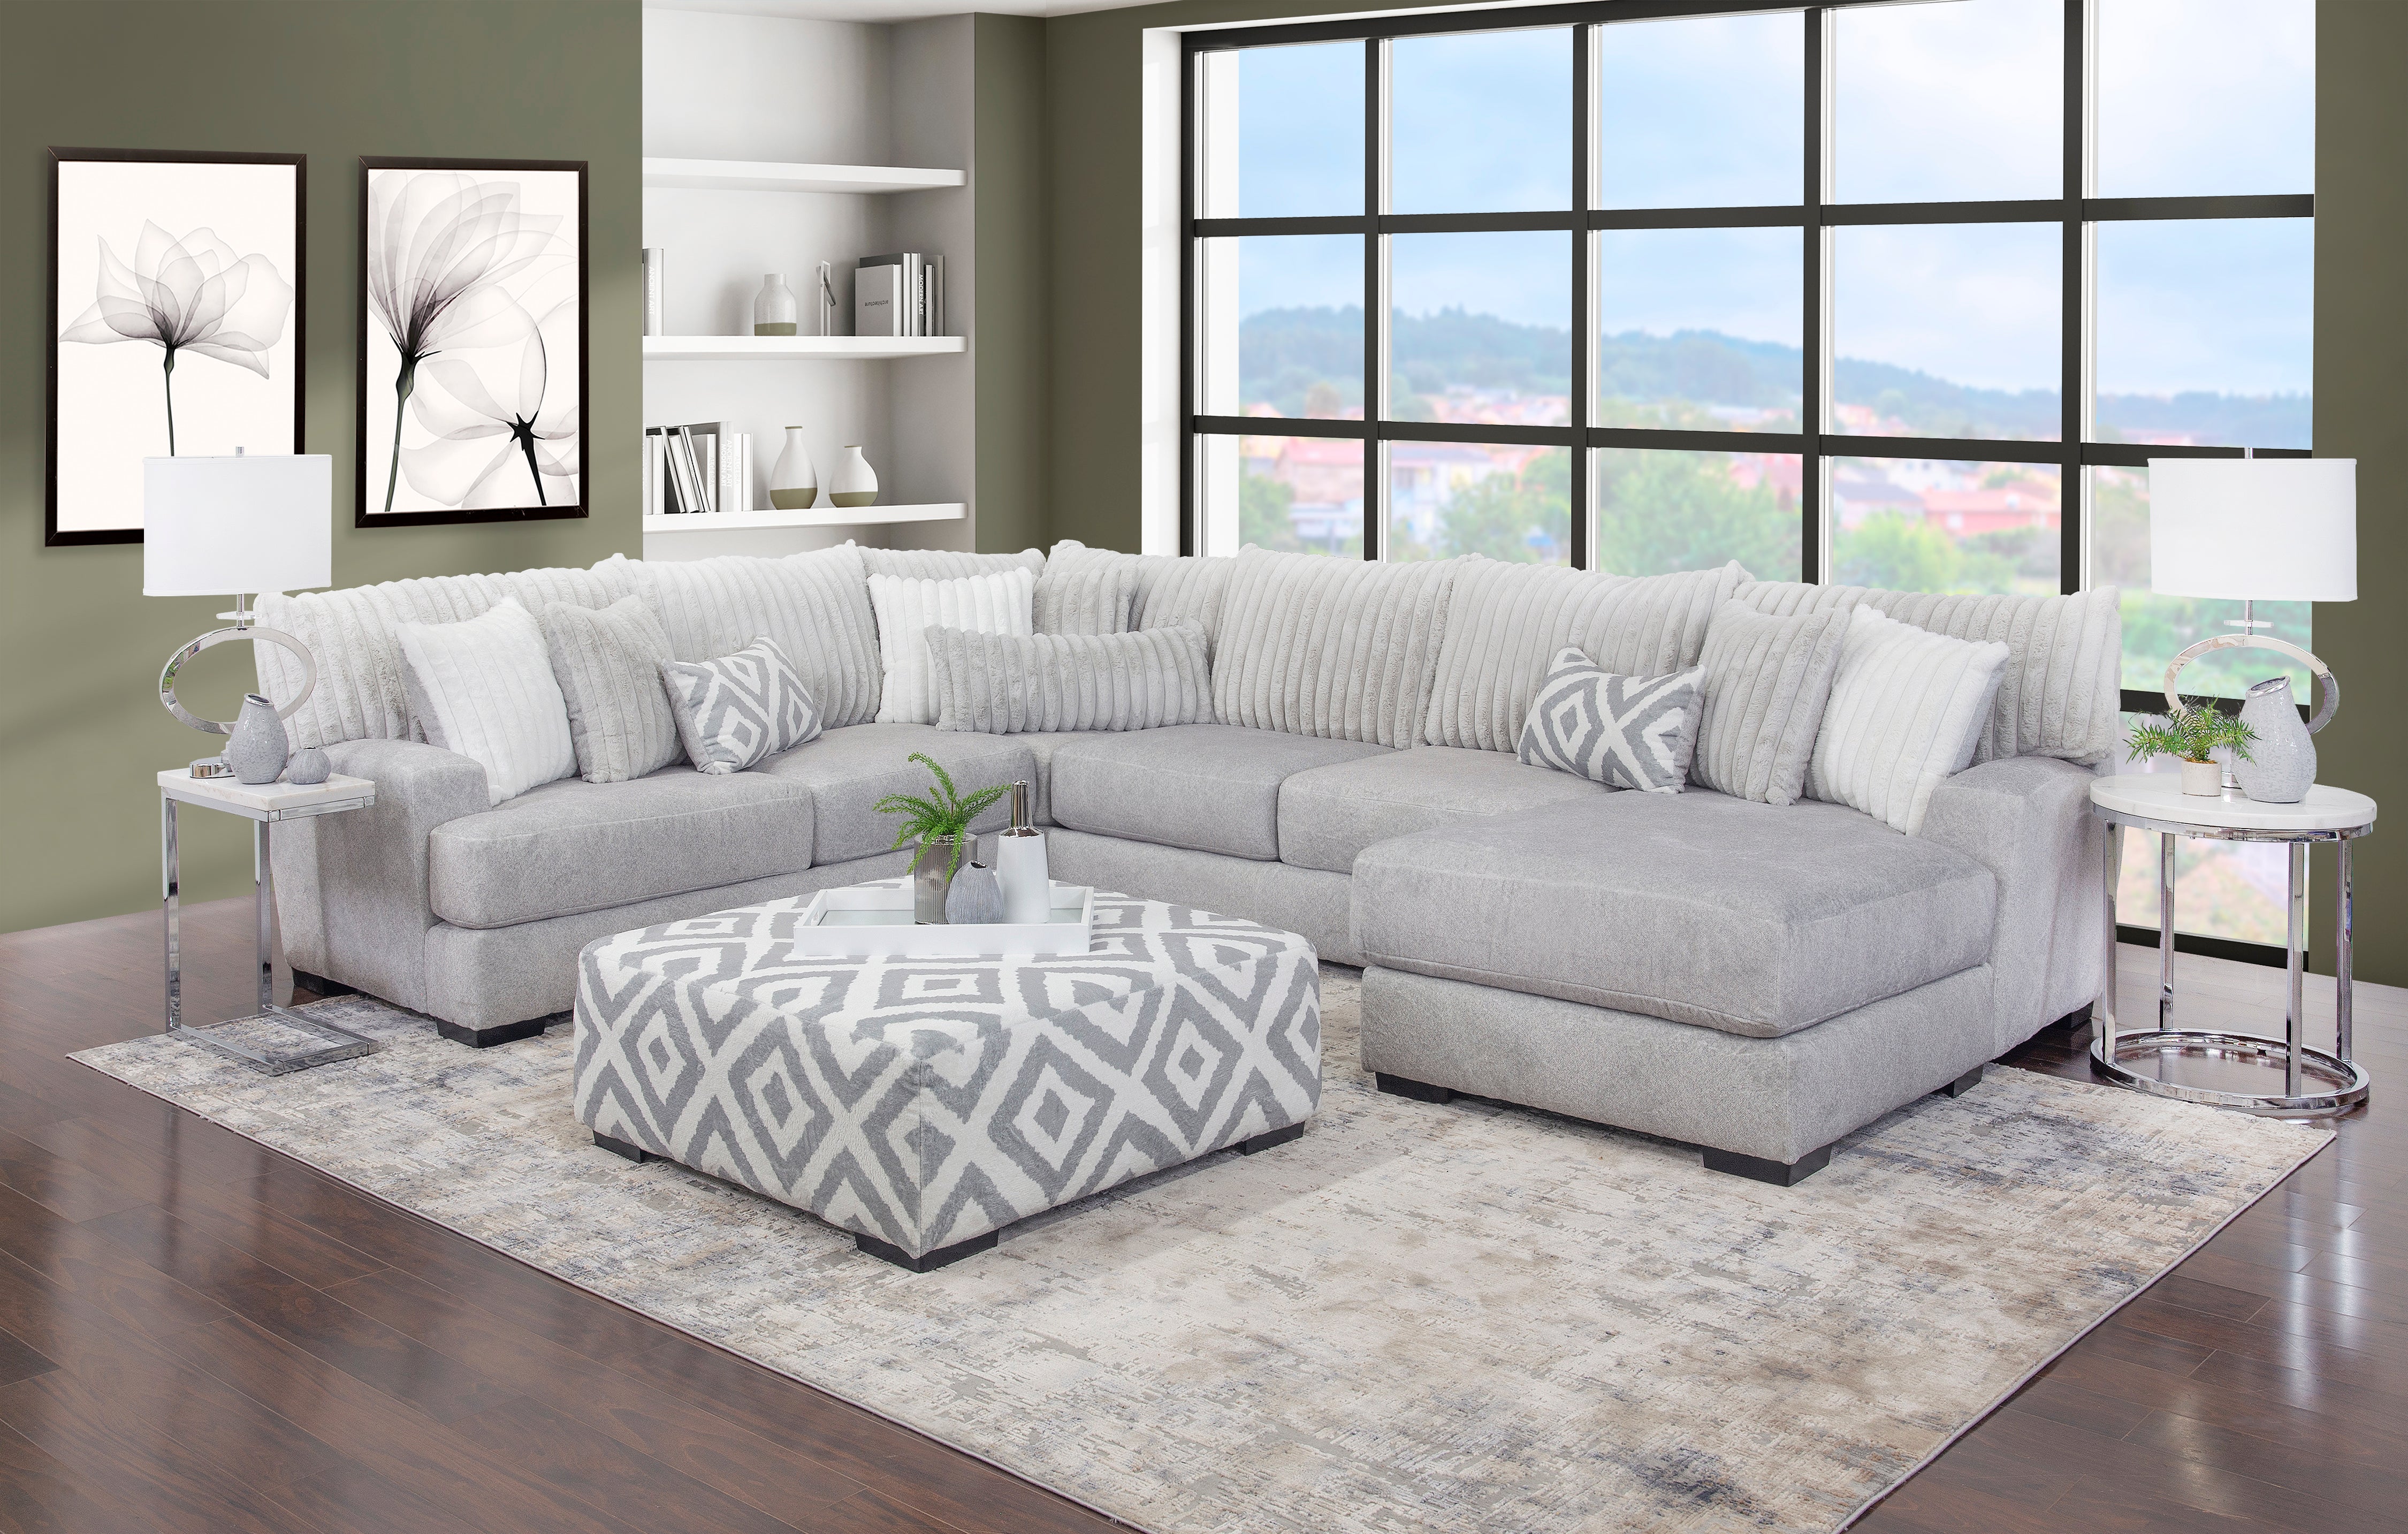 Oakley White 6 Piece Leather Sectional Sofa – Kane's Furniture